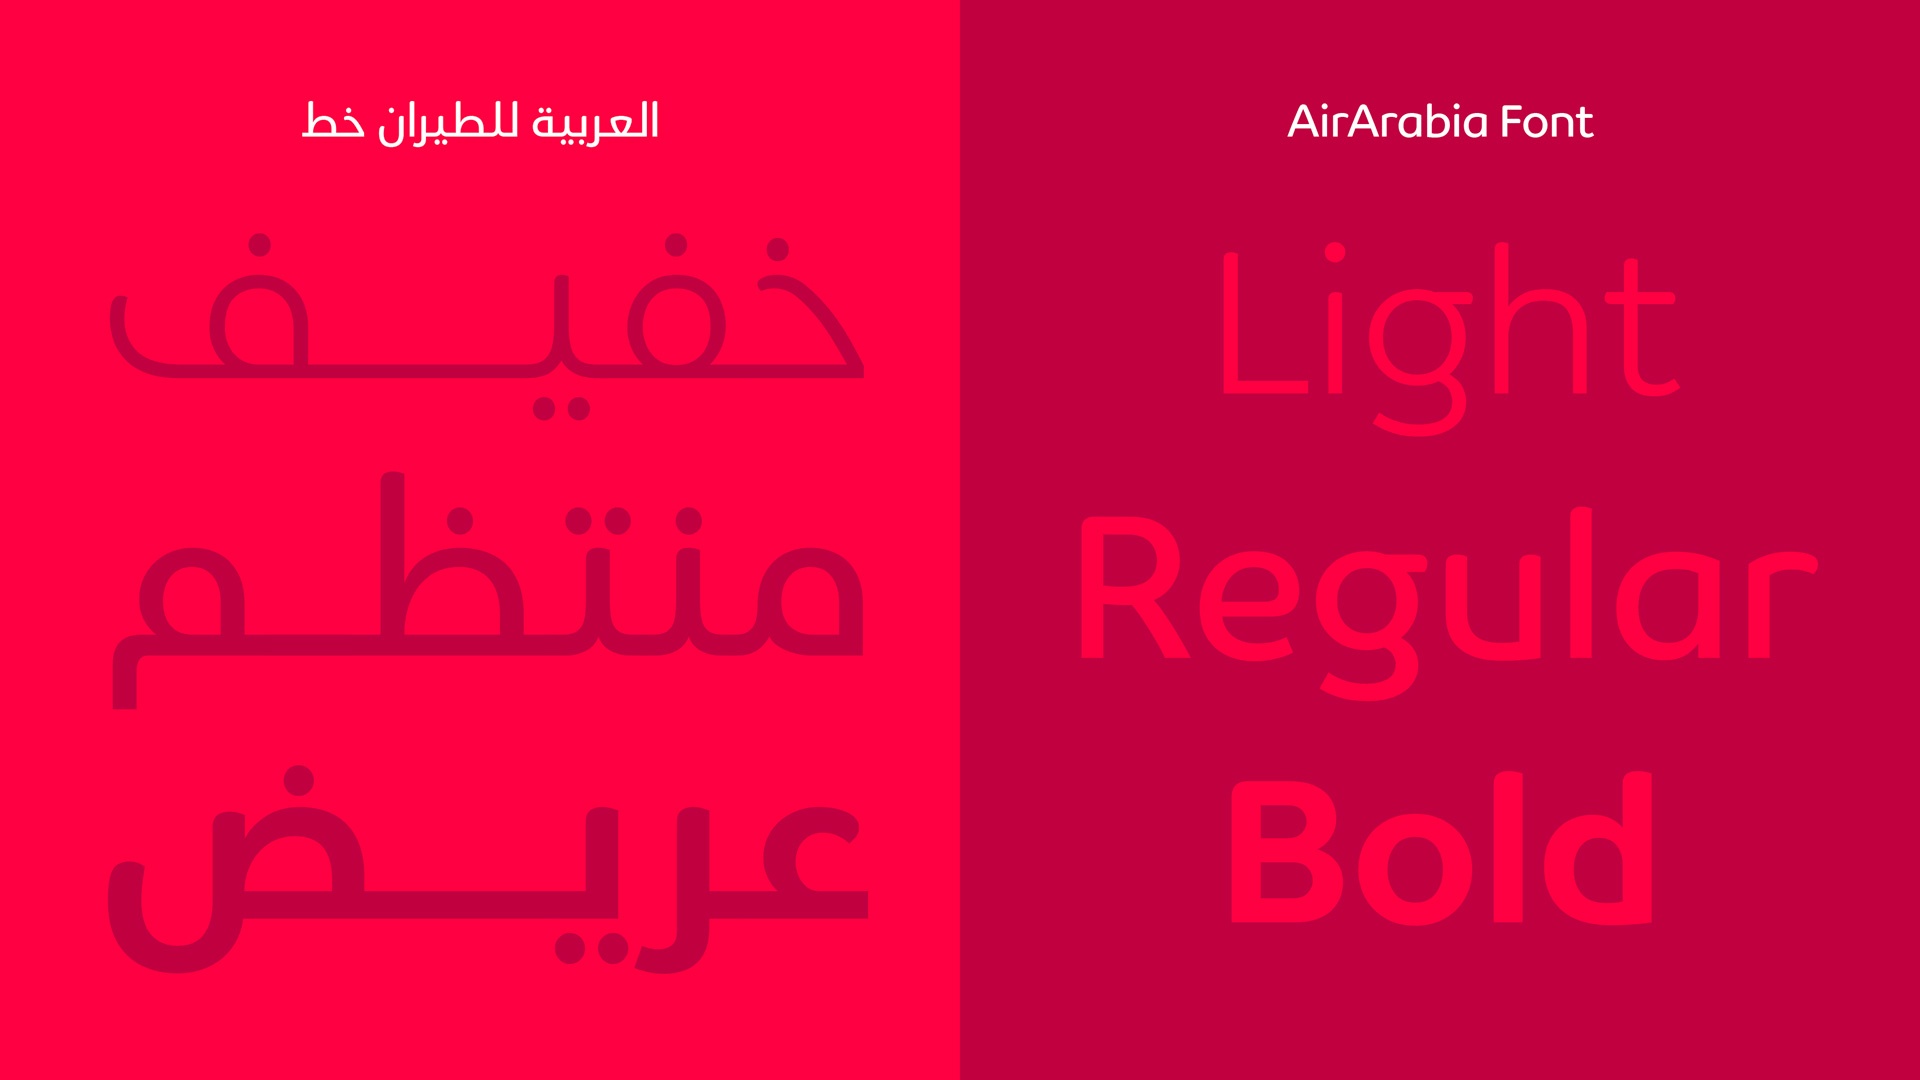 Brand New New Logo Identity And Livery For Air Arabia By Interbrand